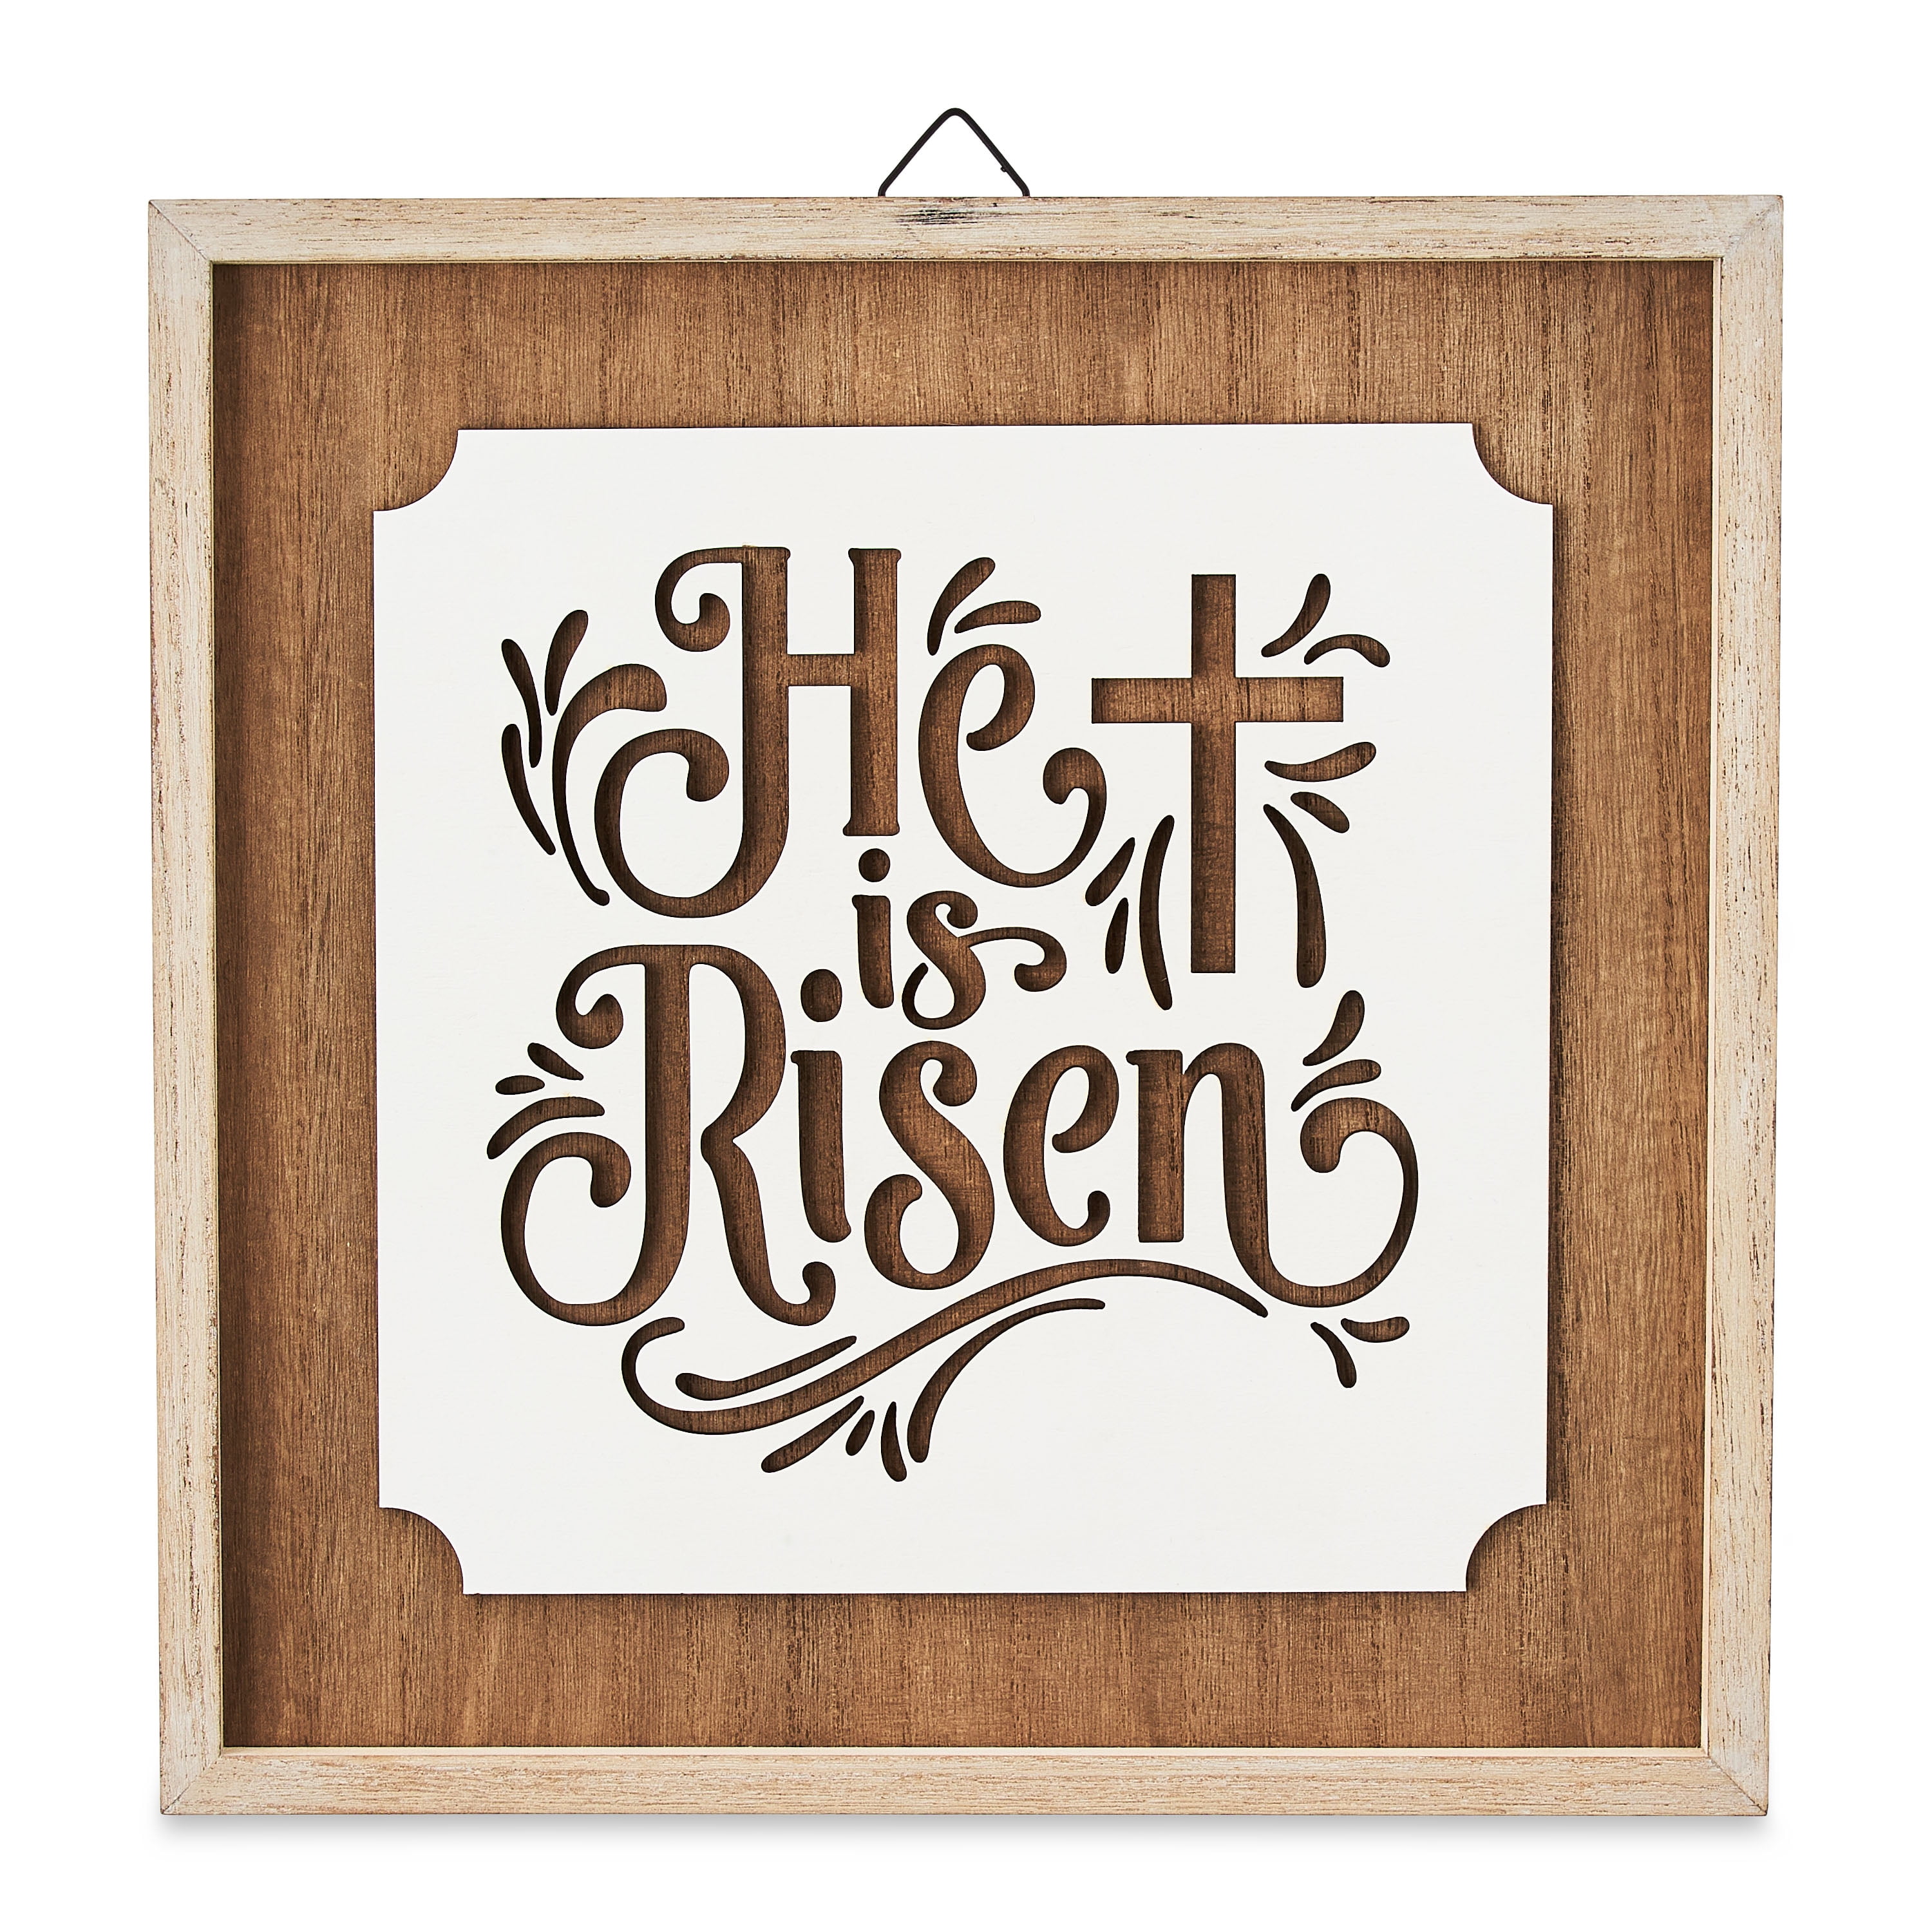 Way To Celebrate Easter He is Risen Wall Sign, 12.5"